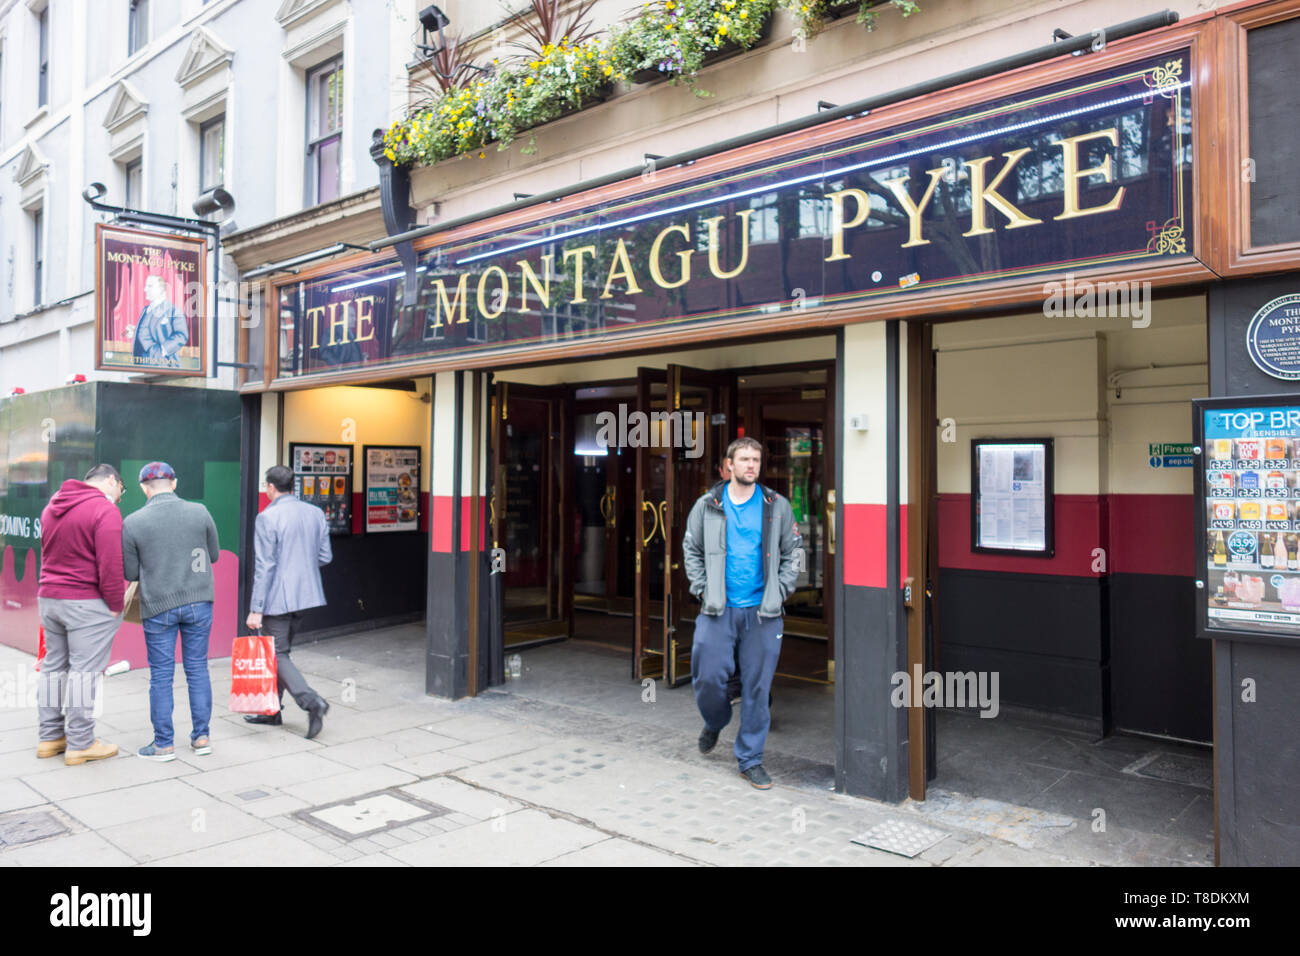 The Montague Pyke public House, a pub belonging to Wetherspoons chain on Charing Cross Road, Soho, London, WC2, UK Stock Photo